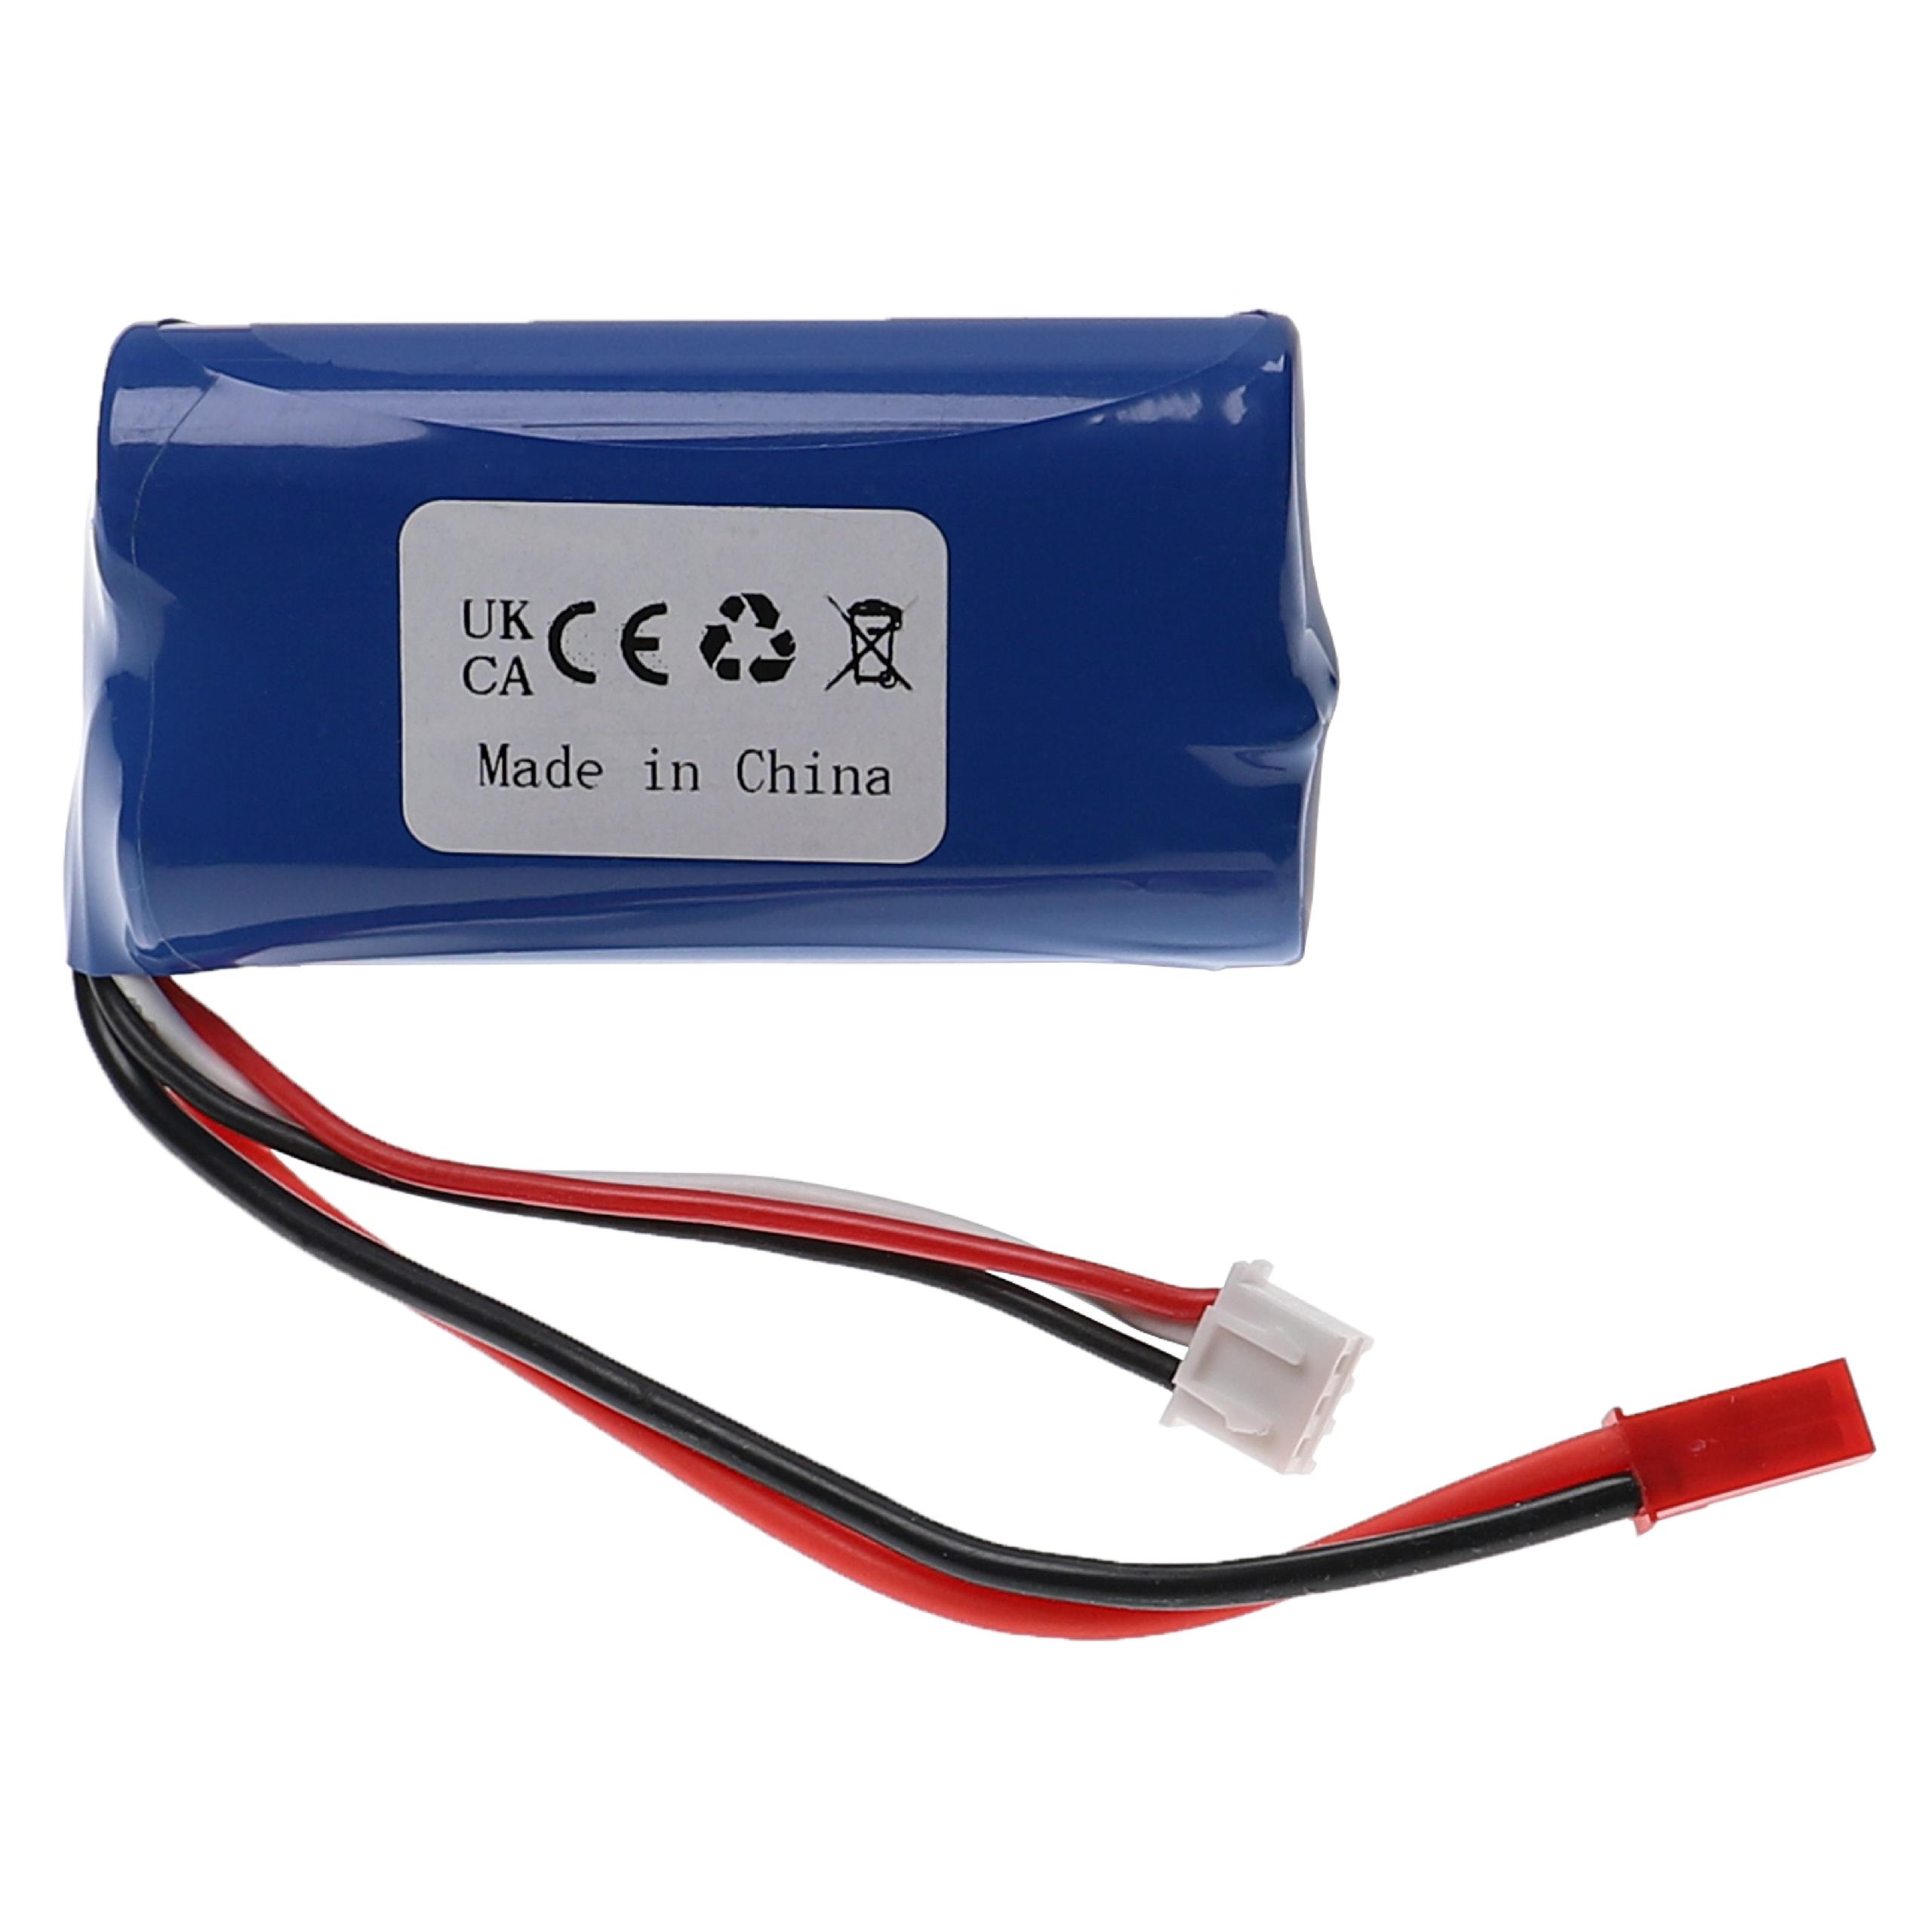 Model Making Device Battery for Wltoys 12428 / MJX F45 / Huanqi 957/948 / Rayline Helikopter MJX F645 F-45 - 1